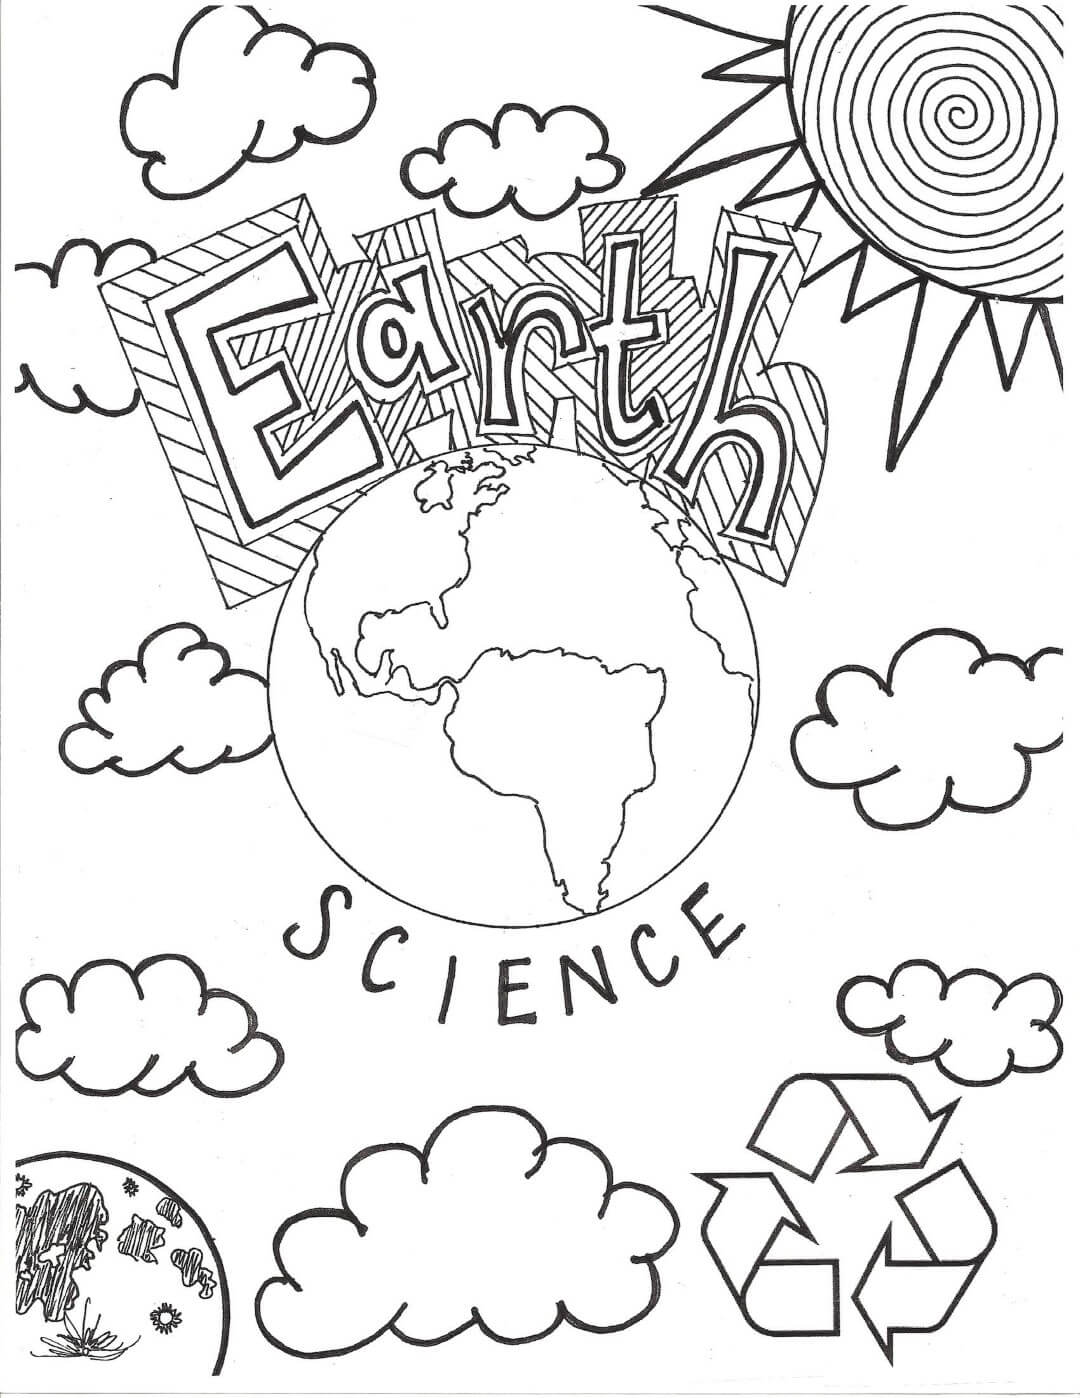 Earth Science Coloring Page